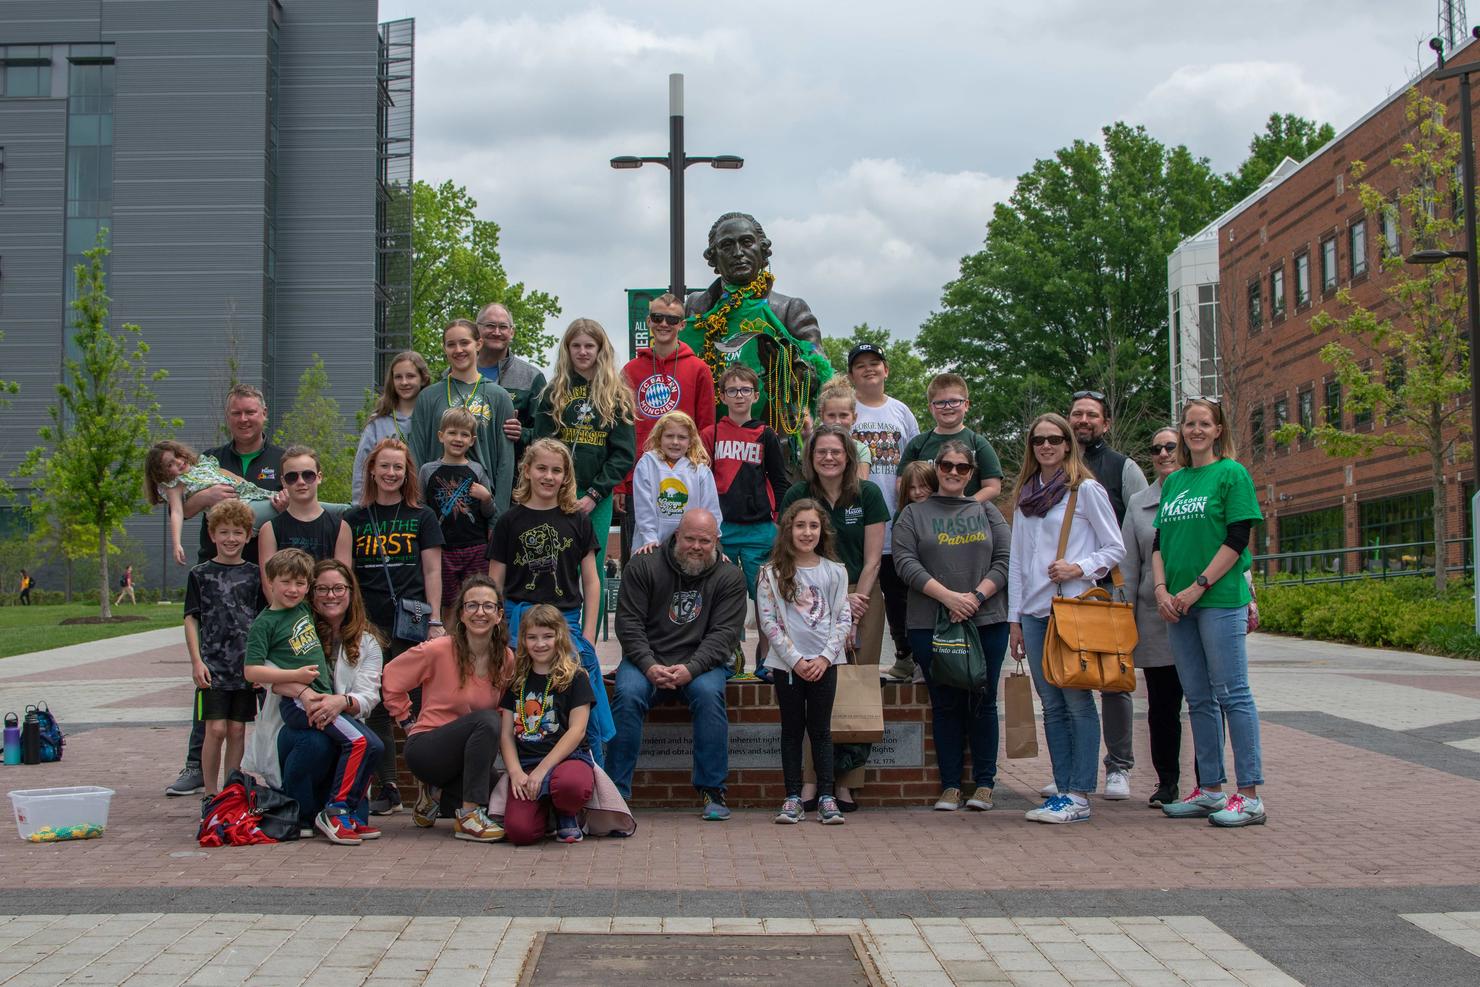 A group of about 30 employees and their children stand together at the George Mason statue on Take Your Junior Patriot to Work Day.